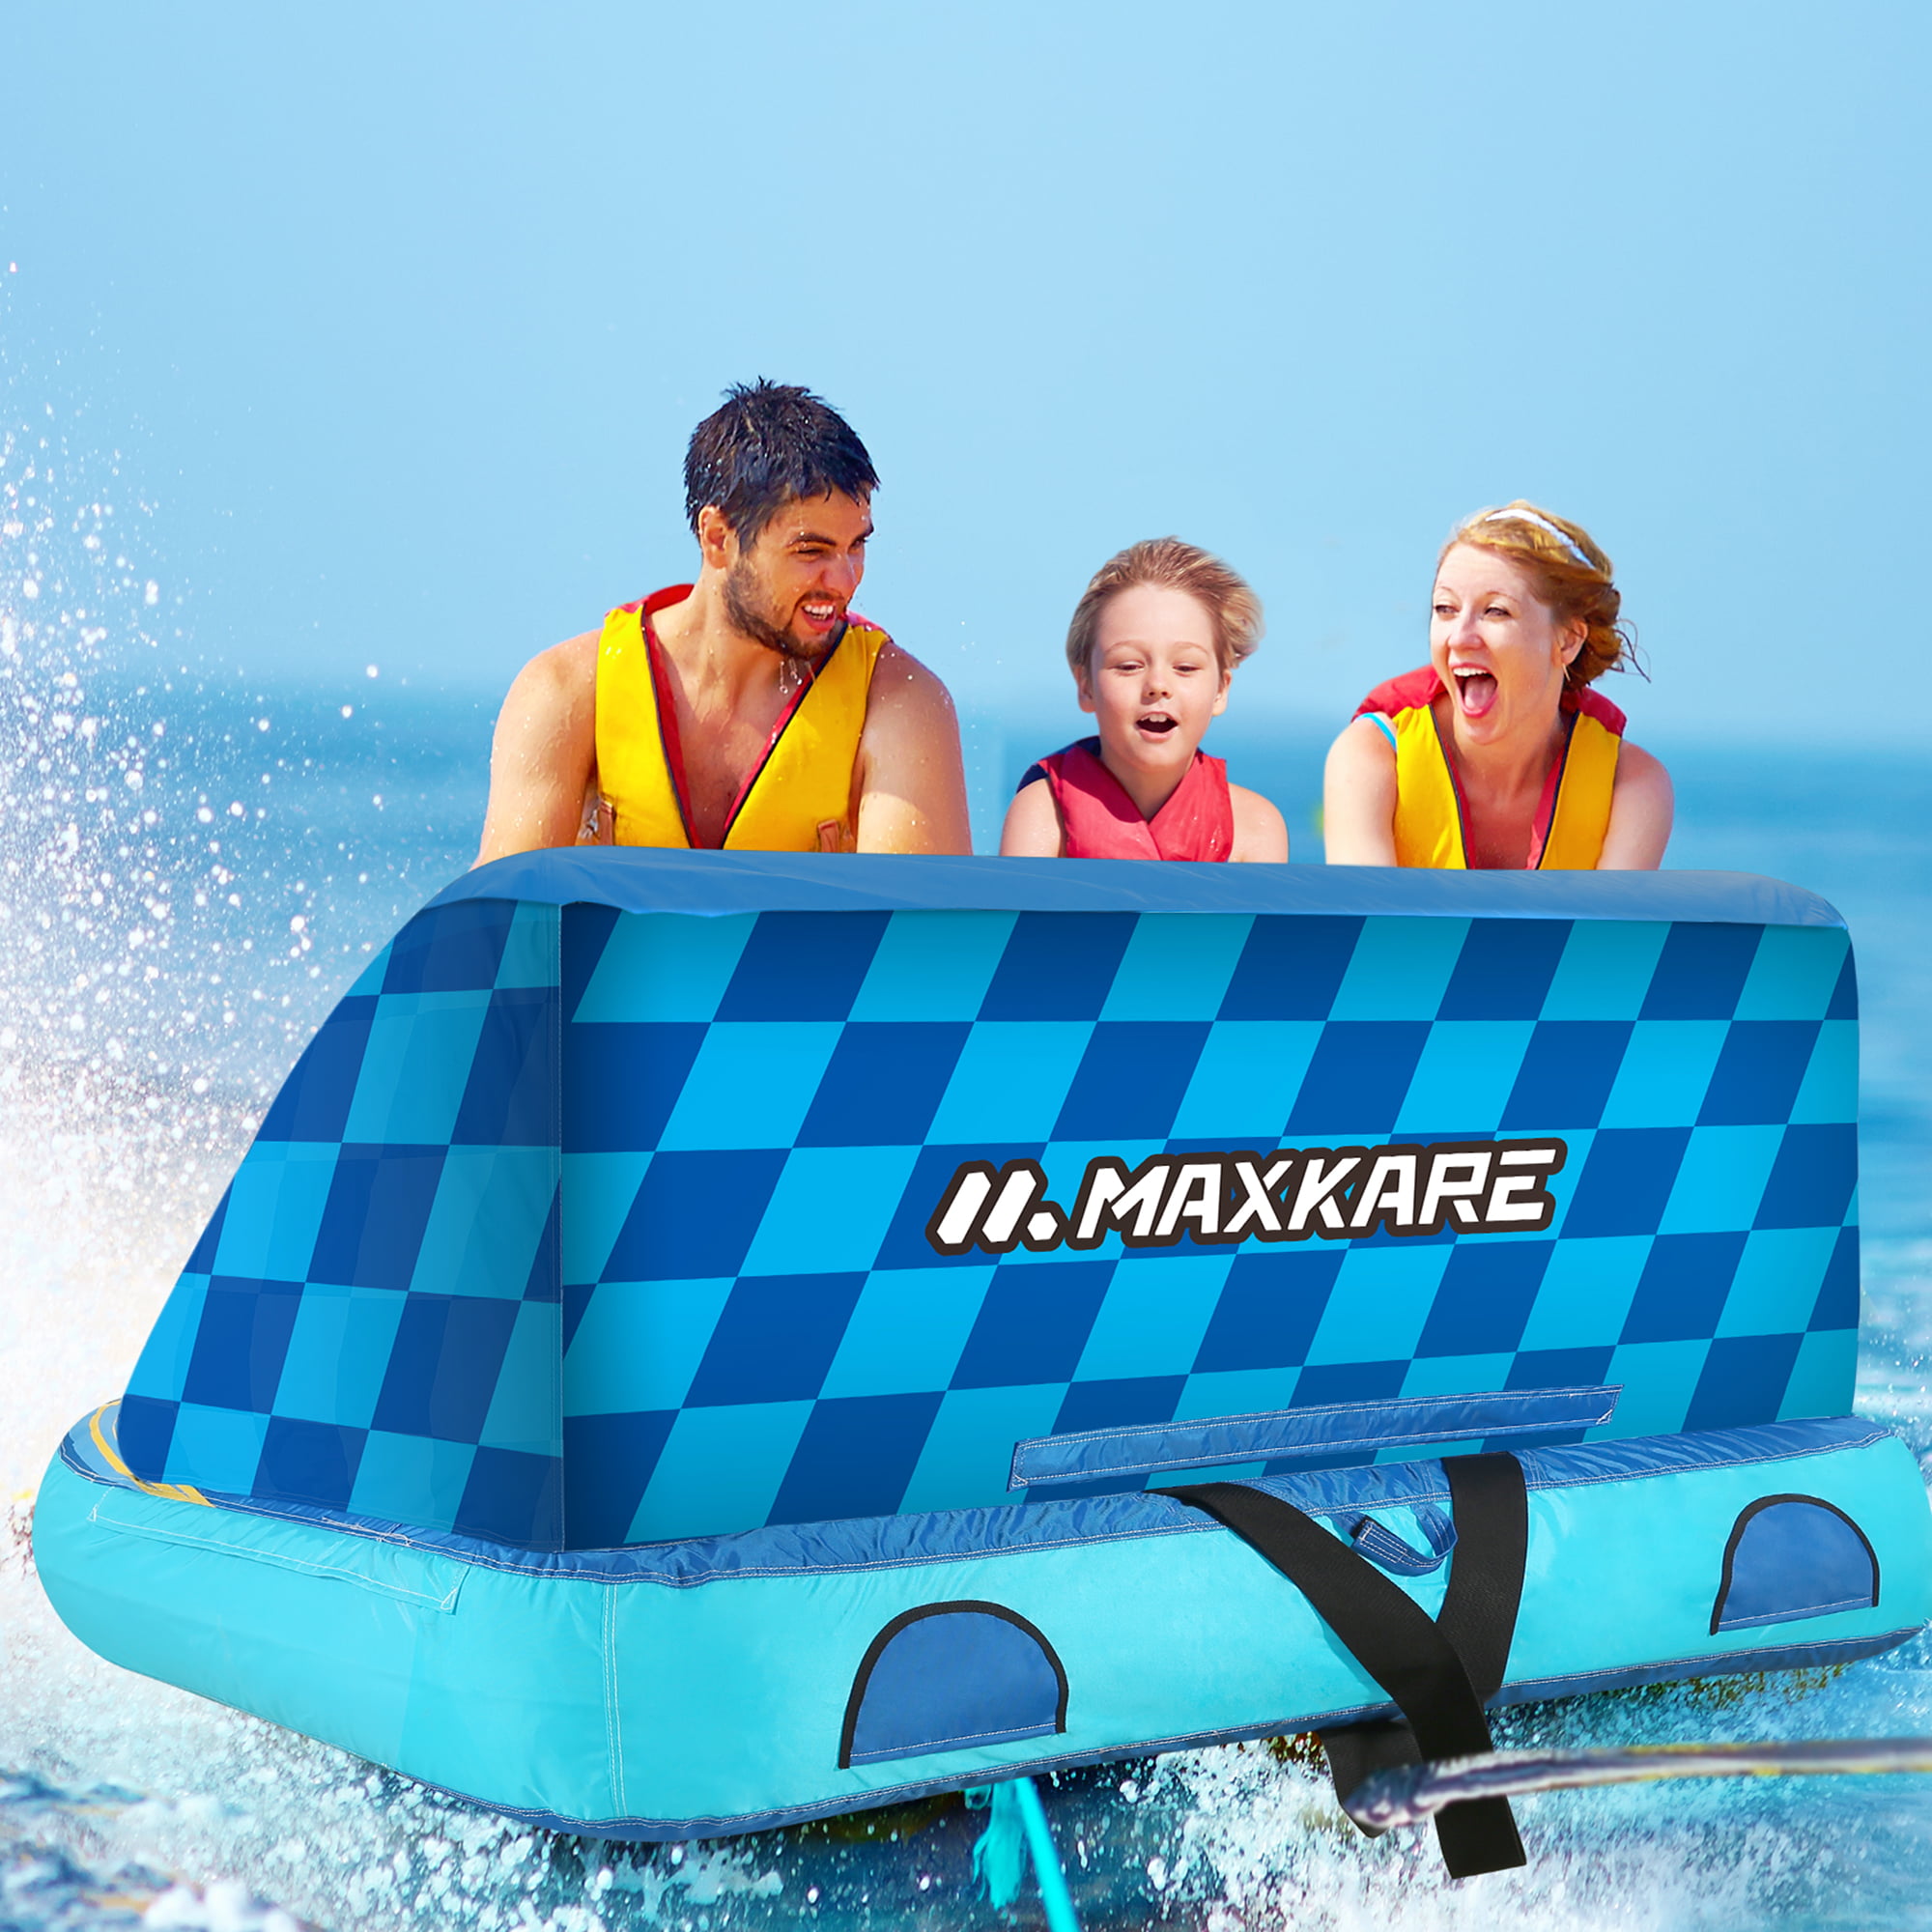 Maxkare 3 Person Inflatable Towable Tube for Boating 79'' × 76'' × 33'', Blue - 2